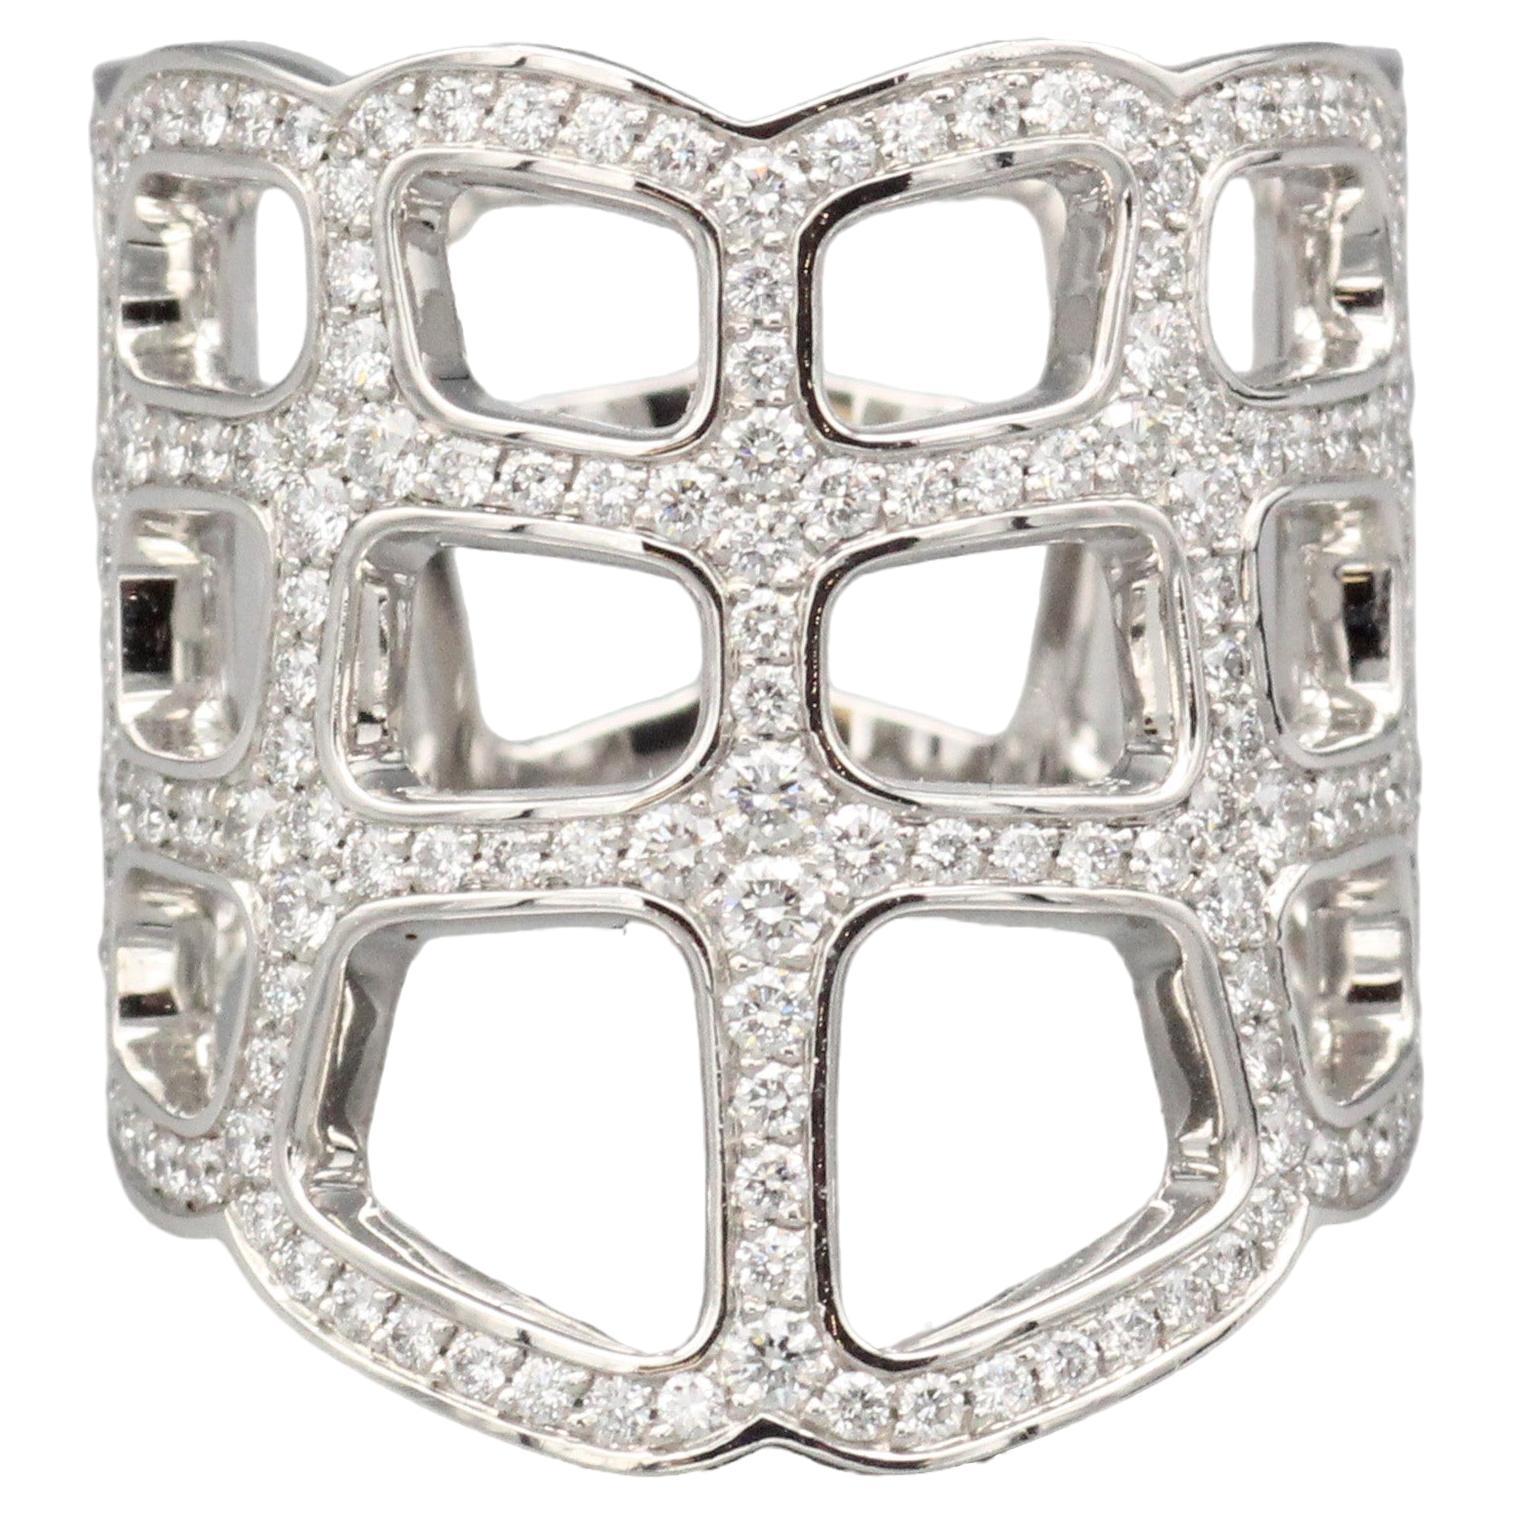 Hermes Niloticus Ombre Diamond 18k White Gold Ring Size 6.5 For Sale